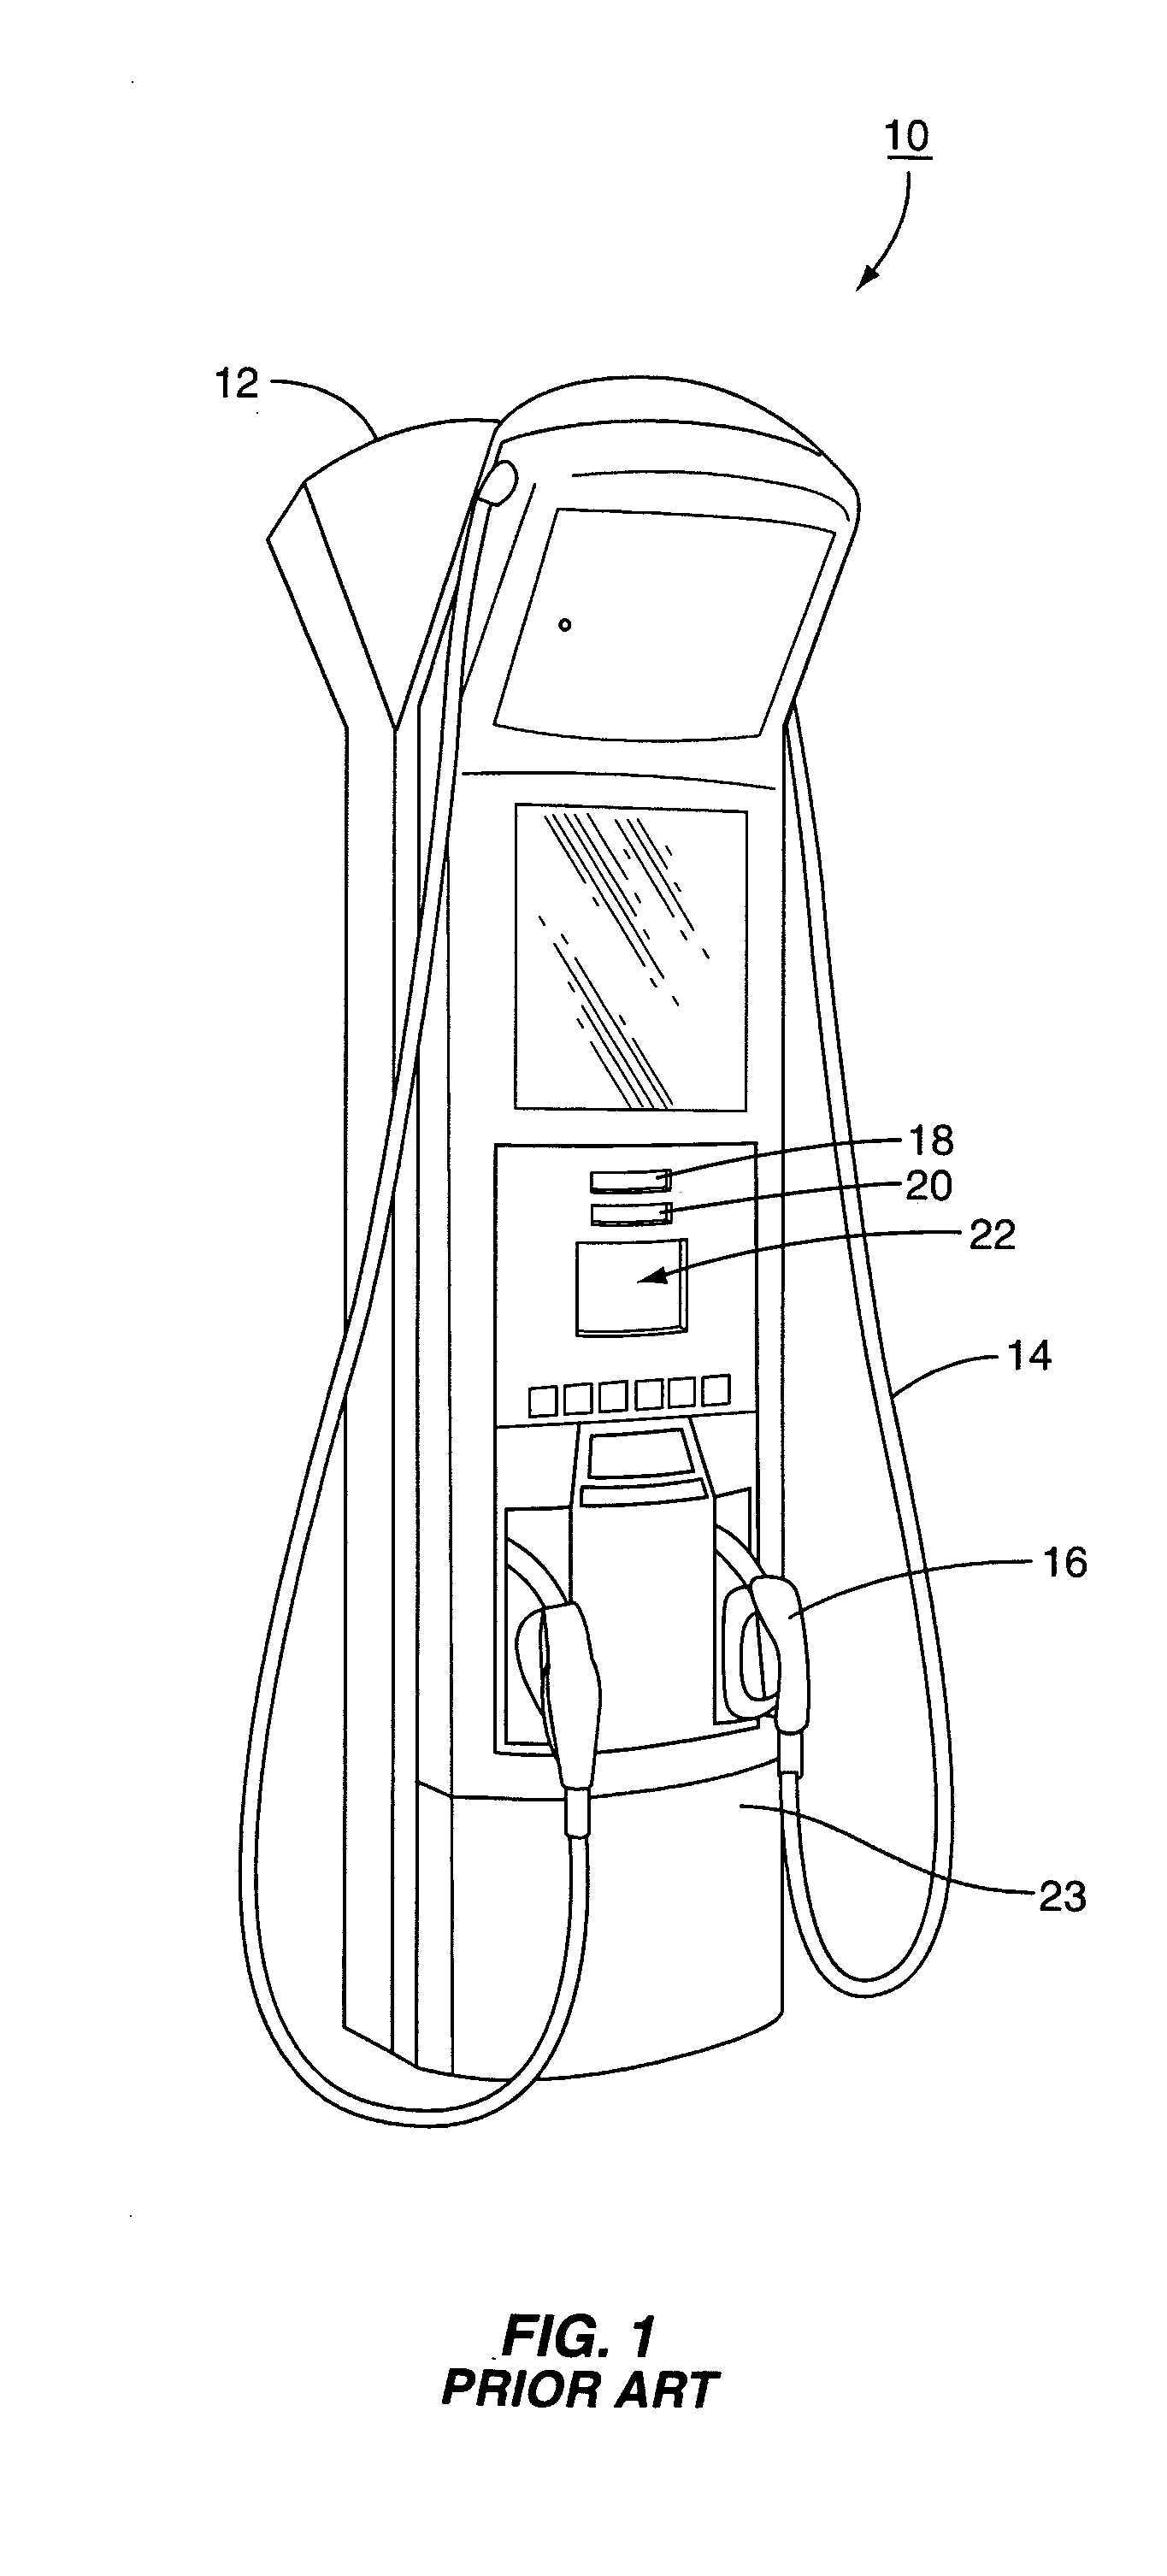 Vacuum-actuated shear valve device, system, and method, particularly for use in service station environments